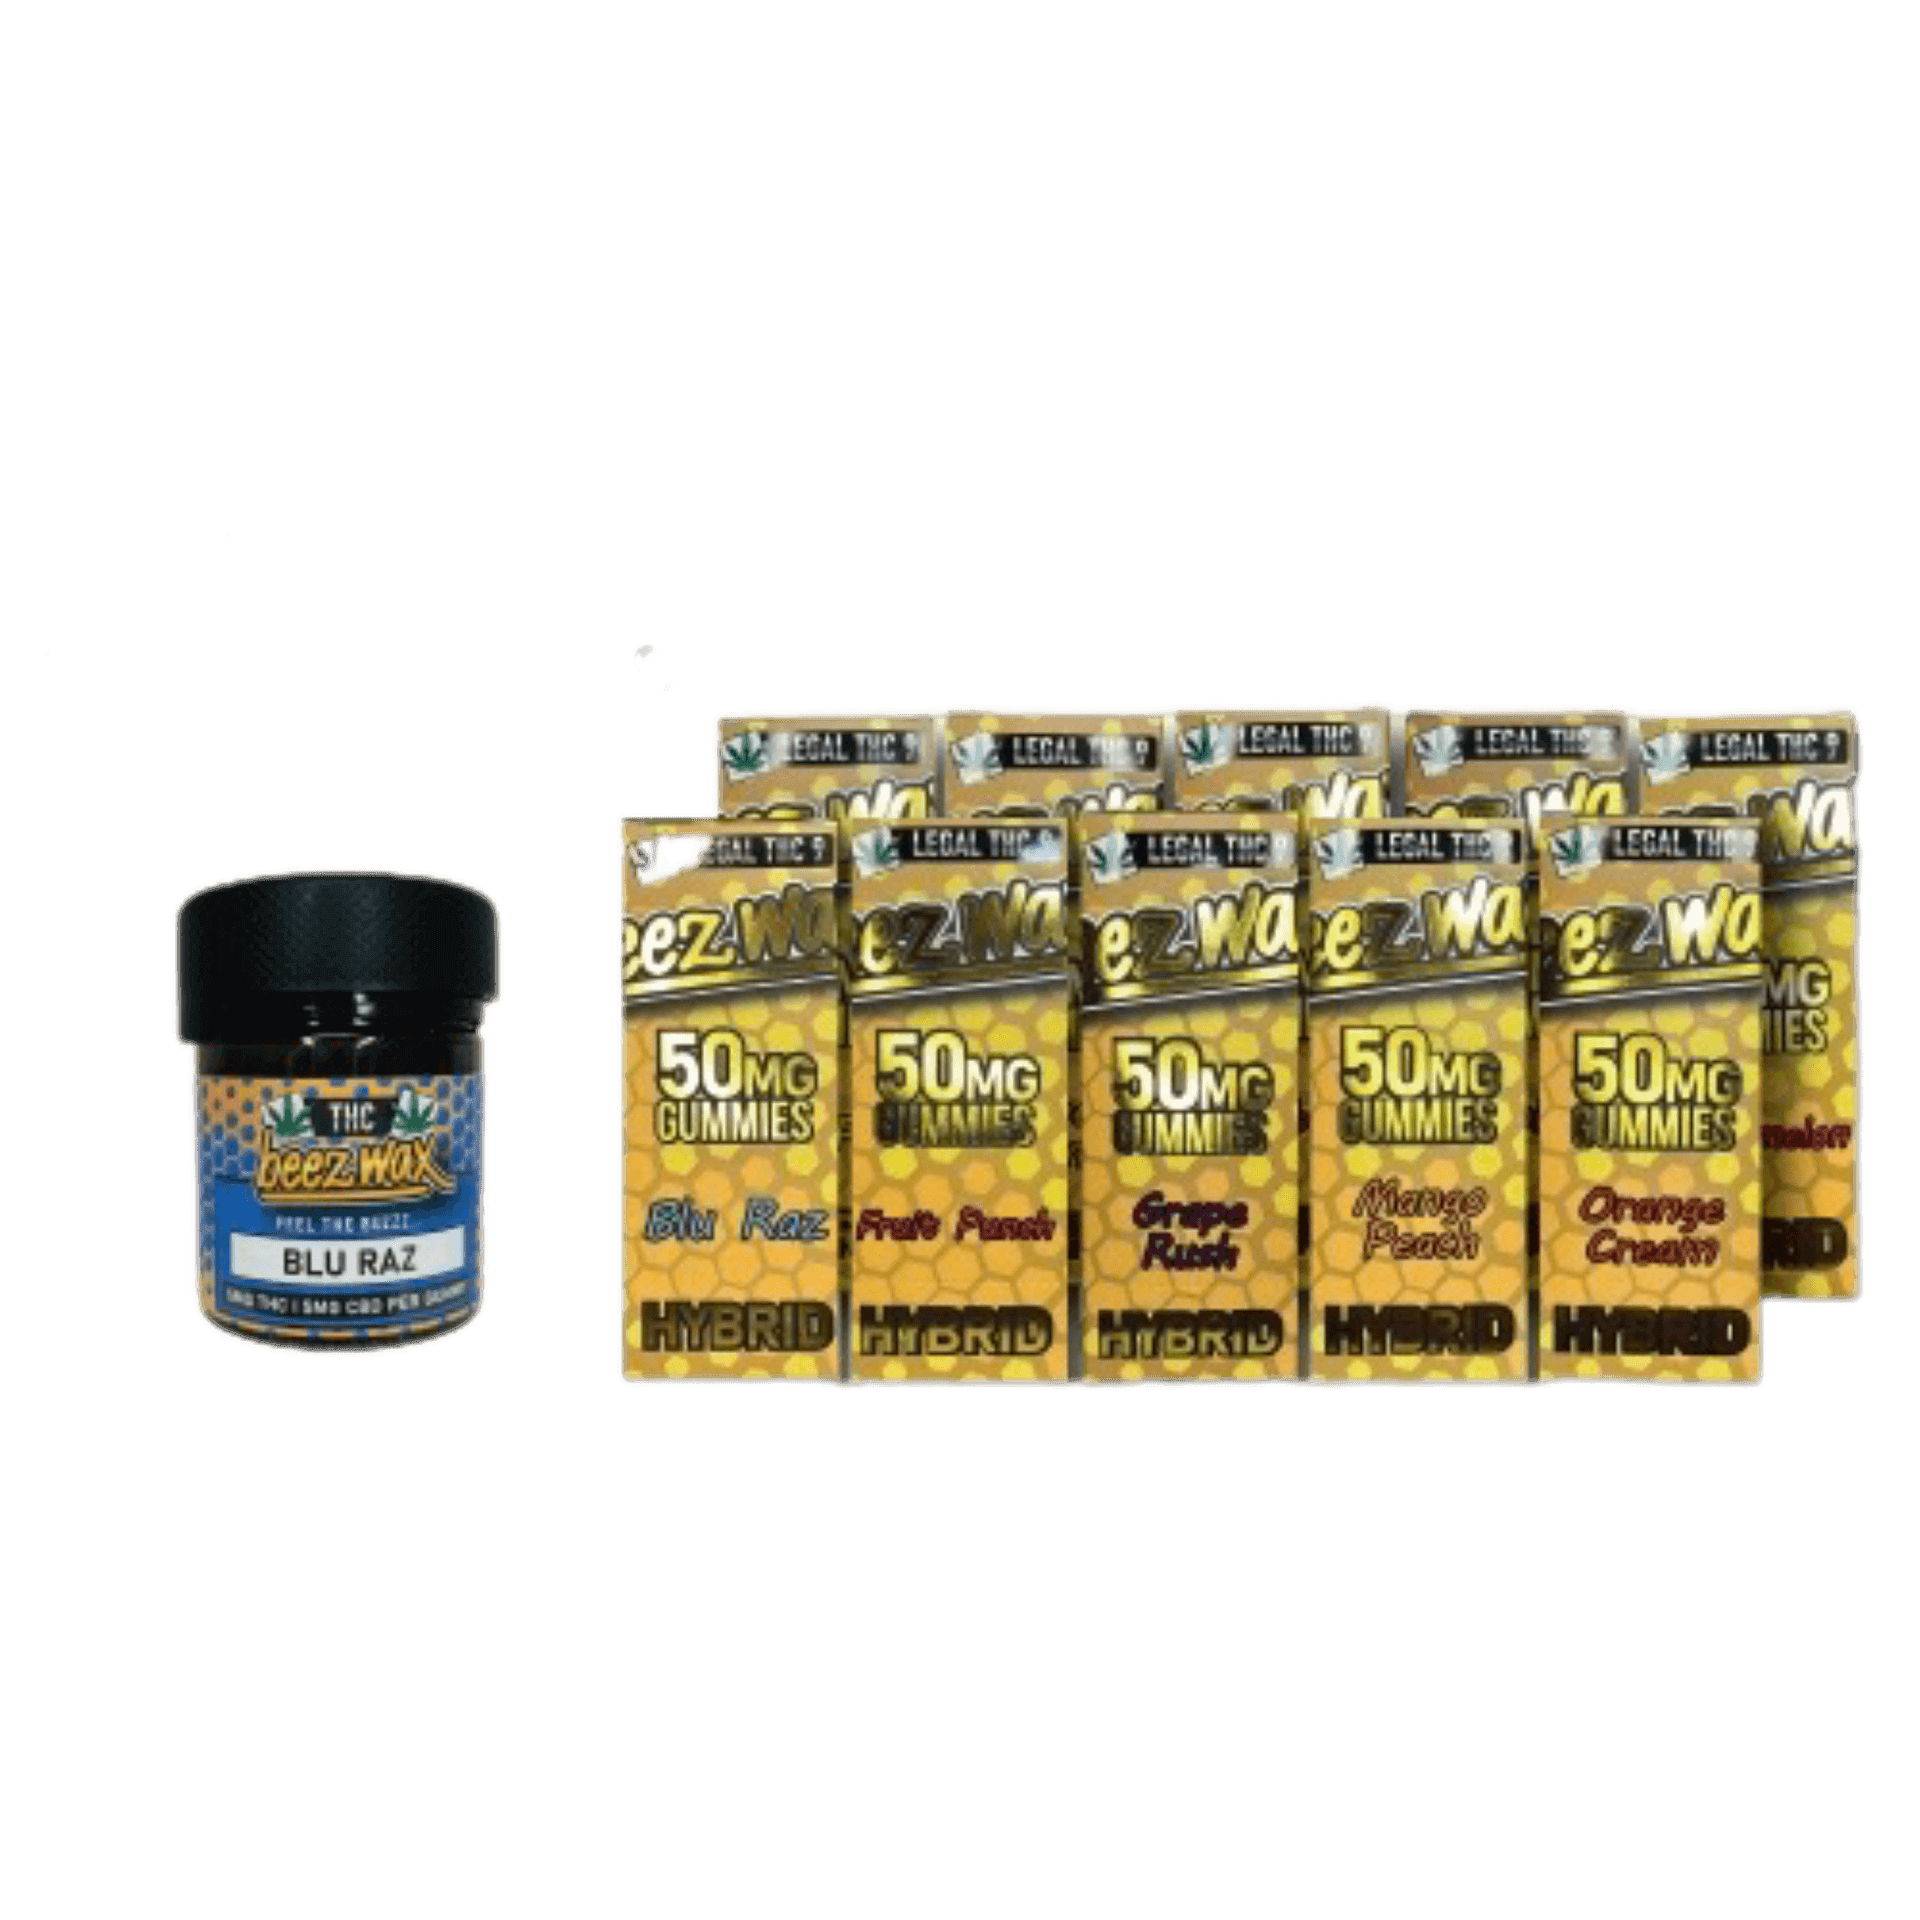 BEEZWAX: 5MG GUMMY AND IN 50MG CONTAINERS 